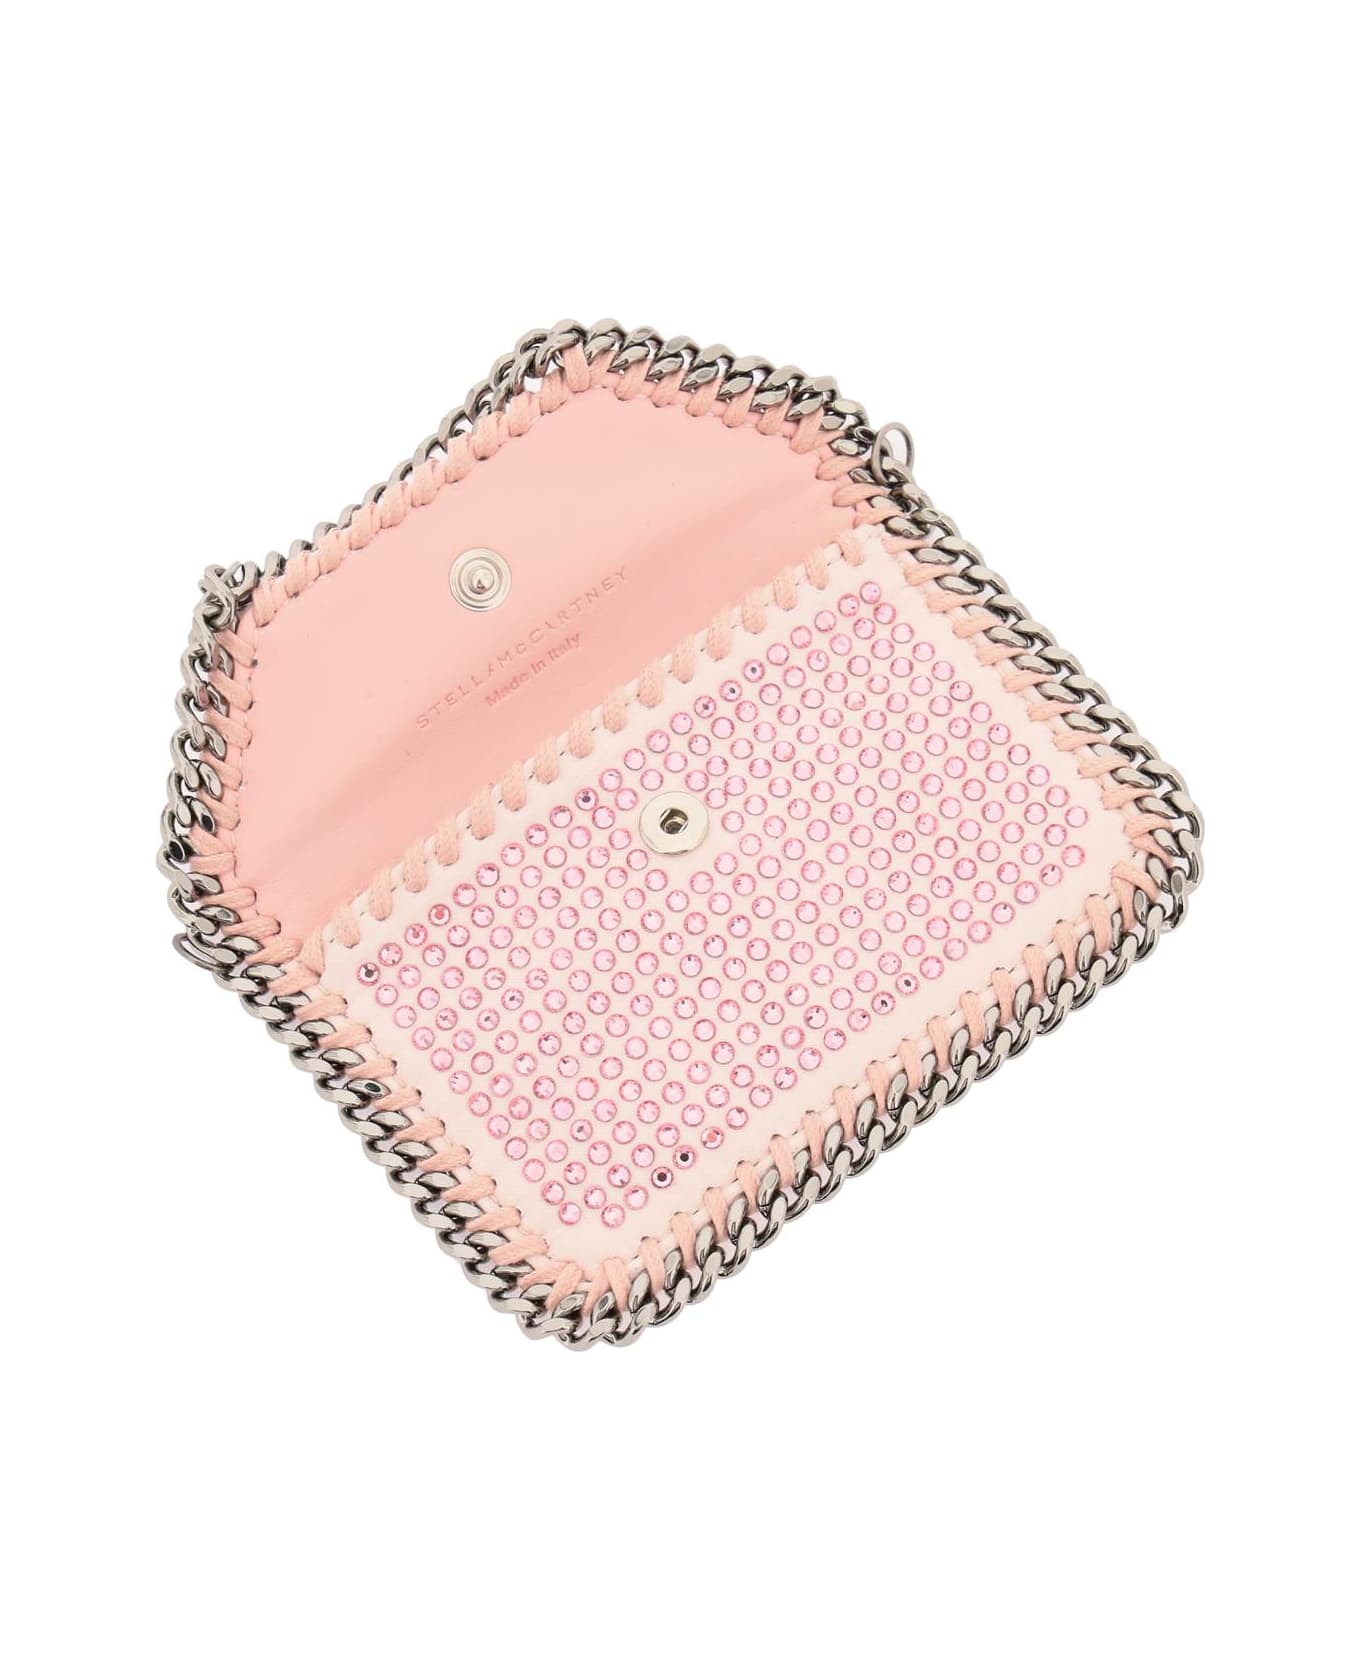 Stella McCartney 'falabella' Cardholder With Crystals - ROSE (Silver)